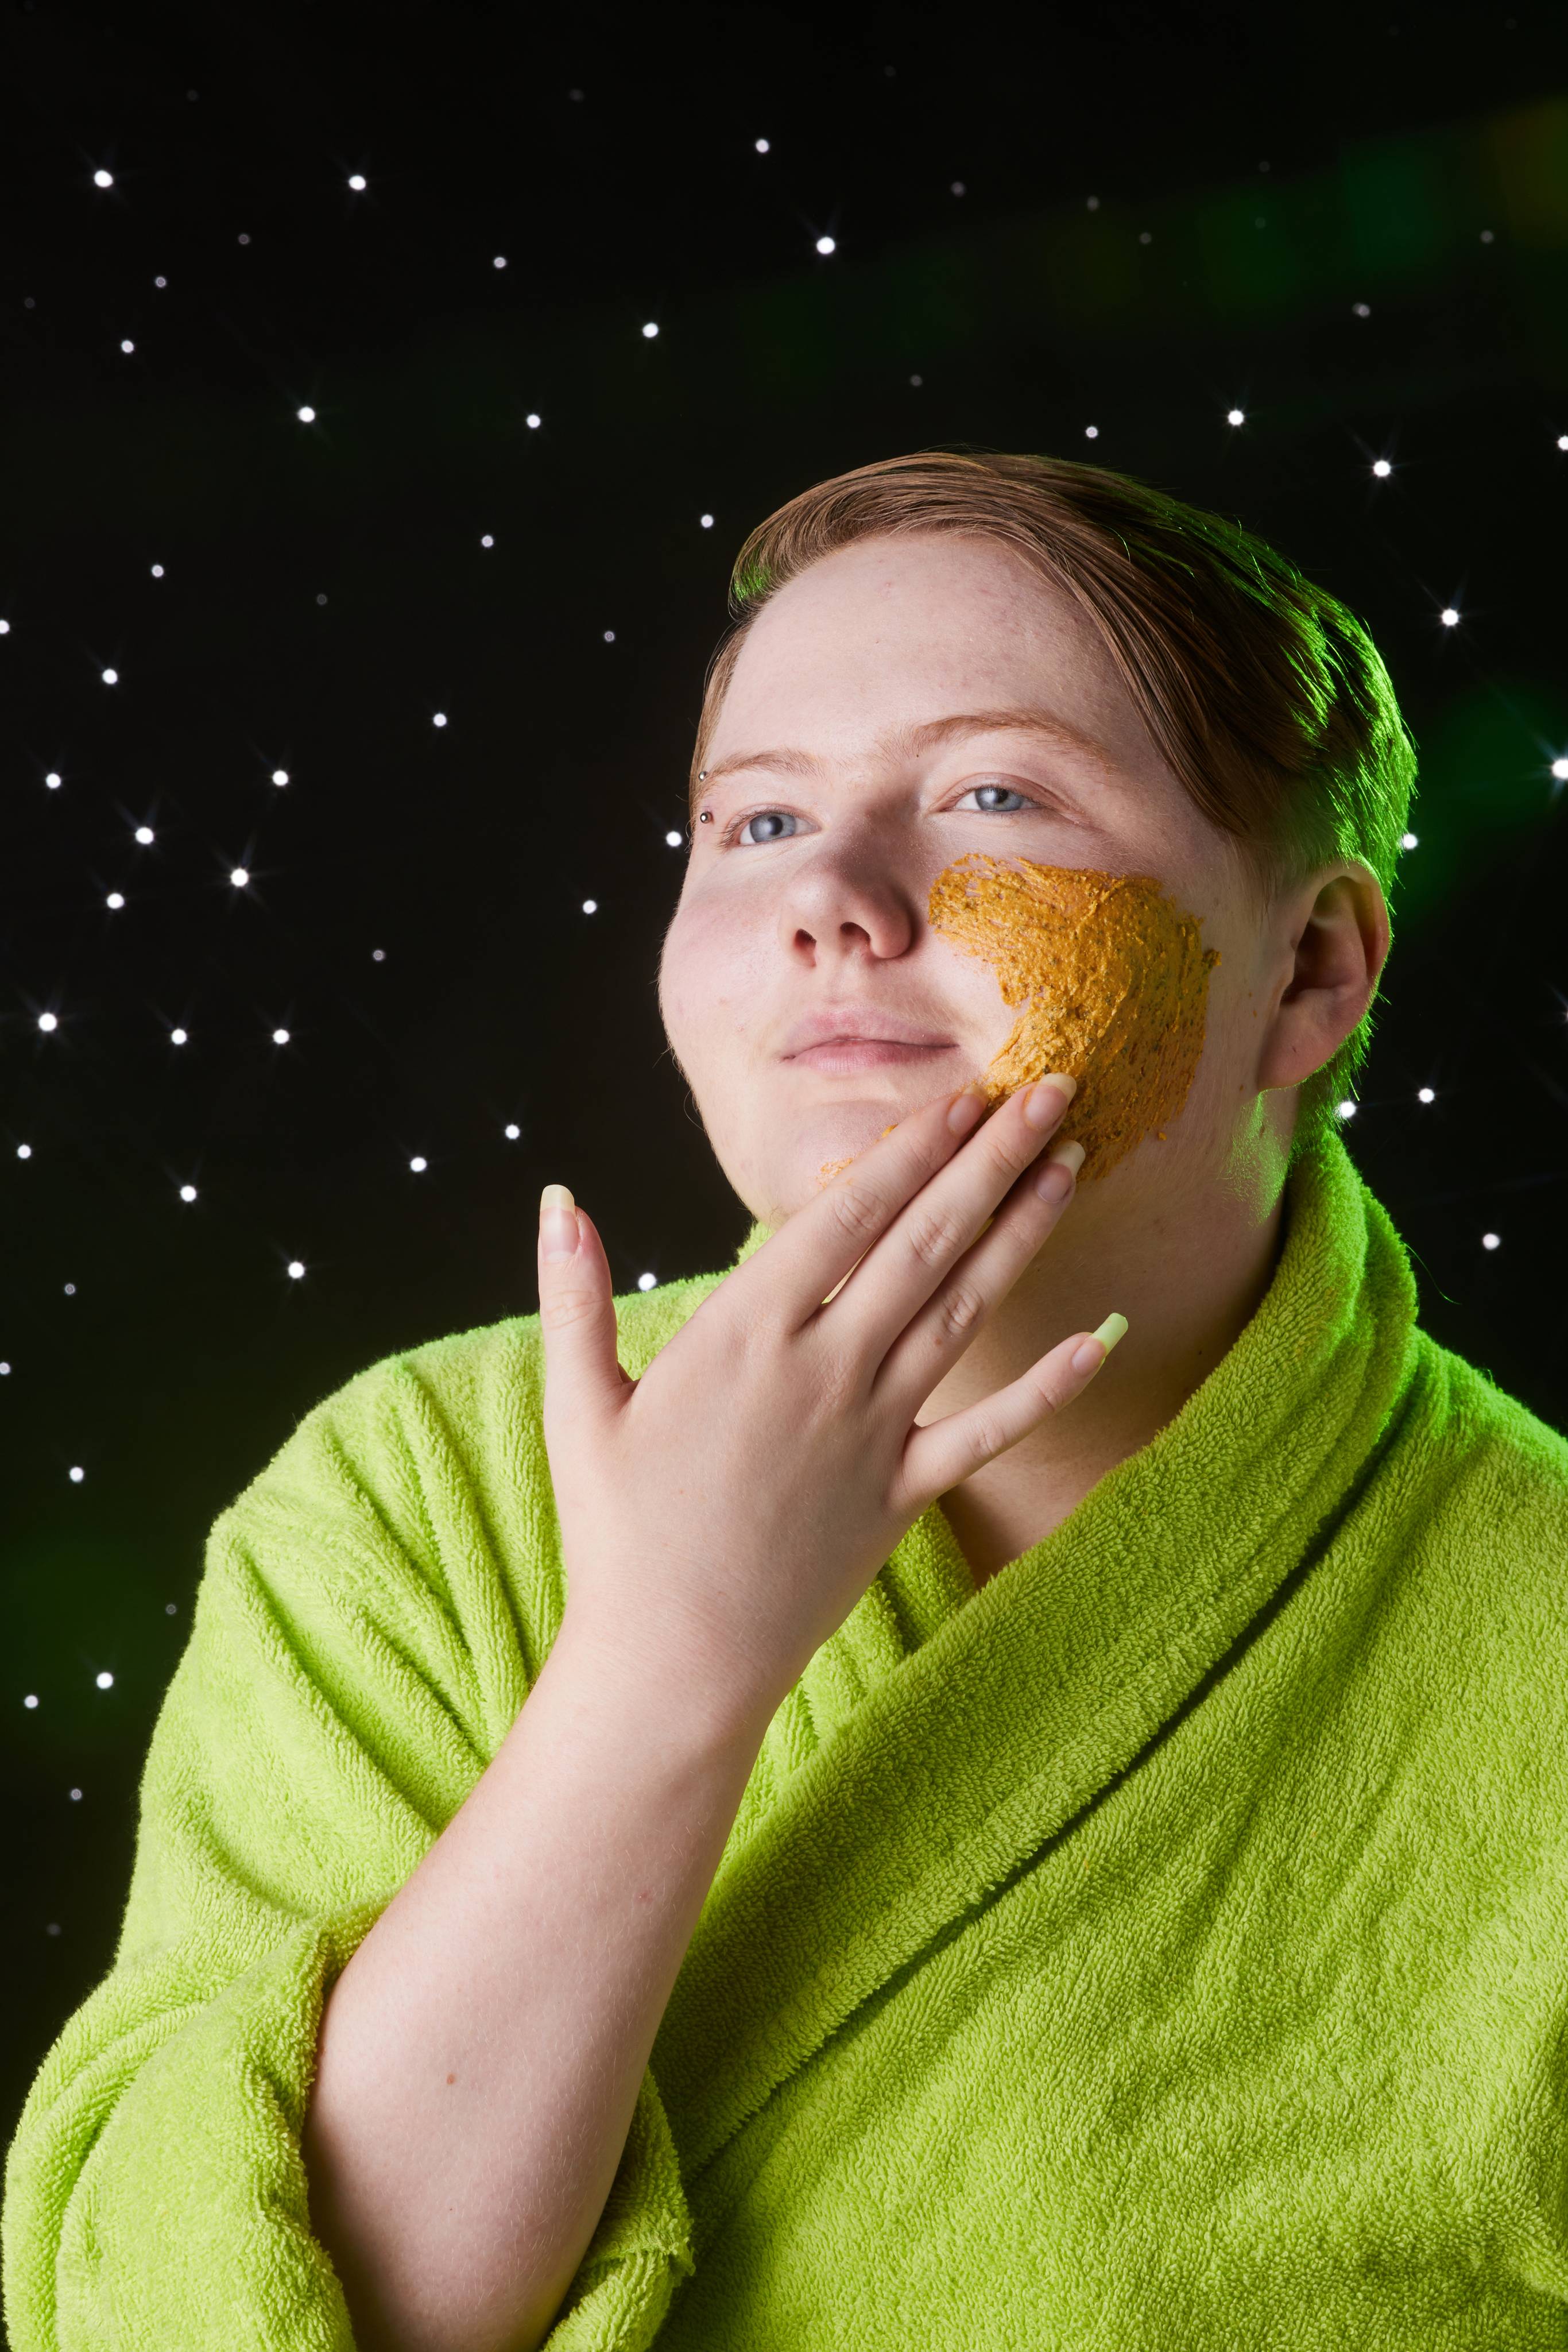 Image shows model in a neon-green robe as they gently spread the product over their face with their hand.